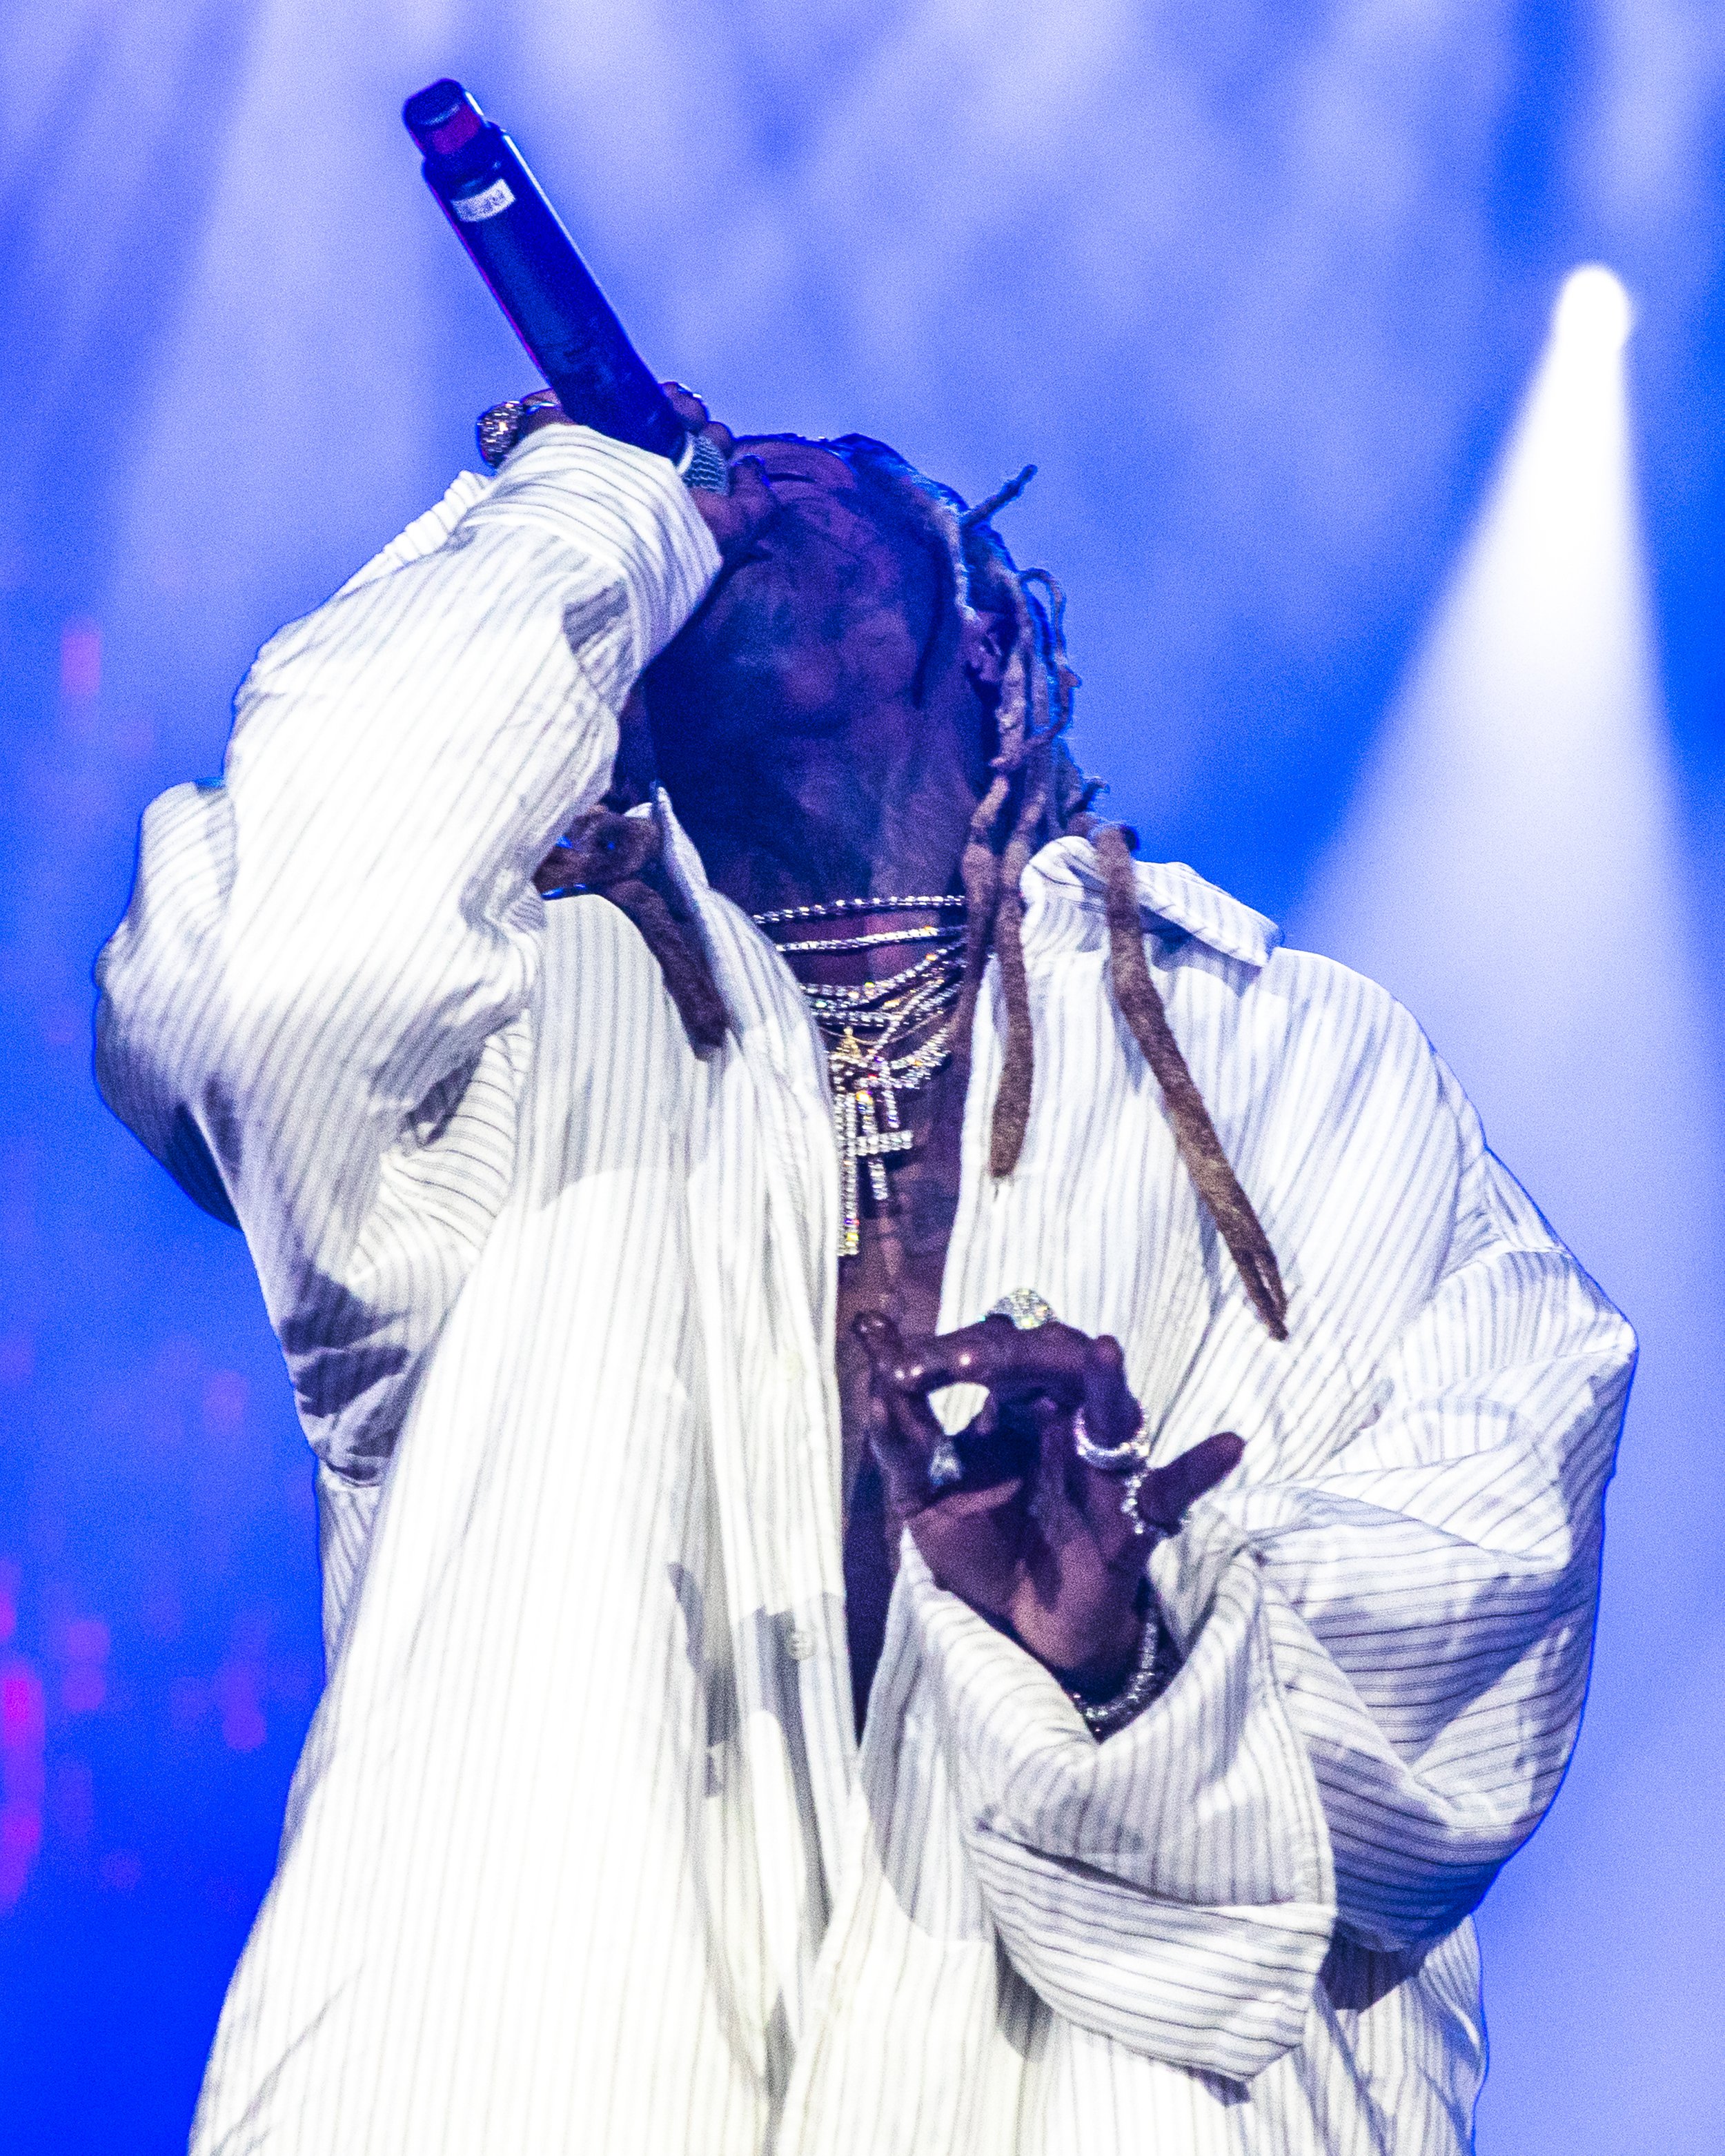 Lil Wayne and Von Miller -  The 18th Annual All White Attire Party -  PHOTO BY Mowgli Miles of Interracial Frineds-97.JPG